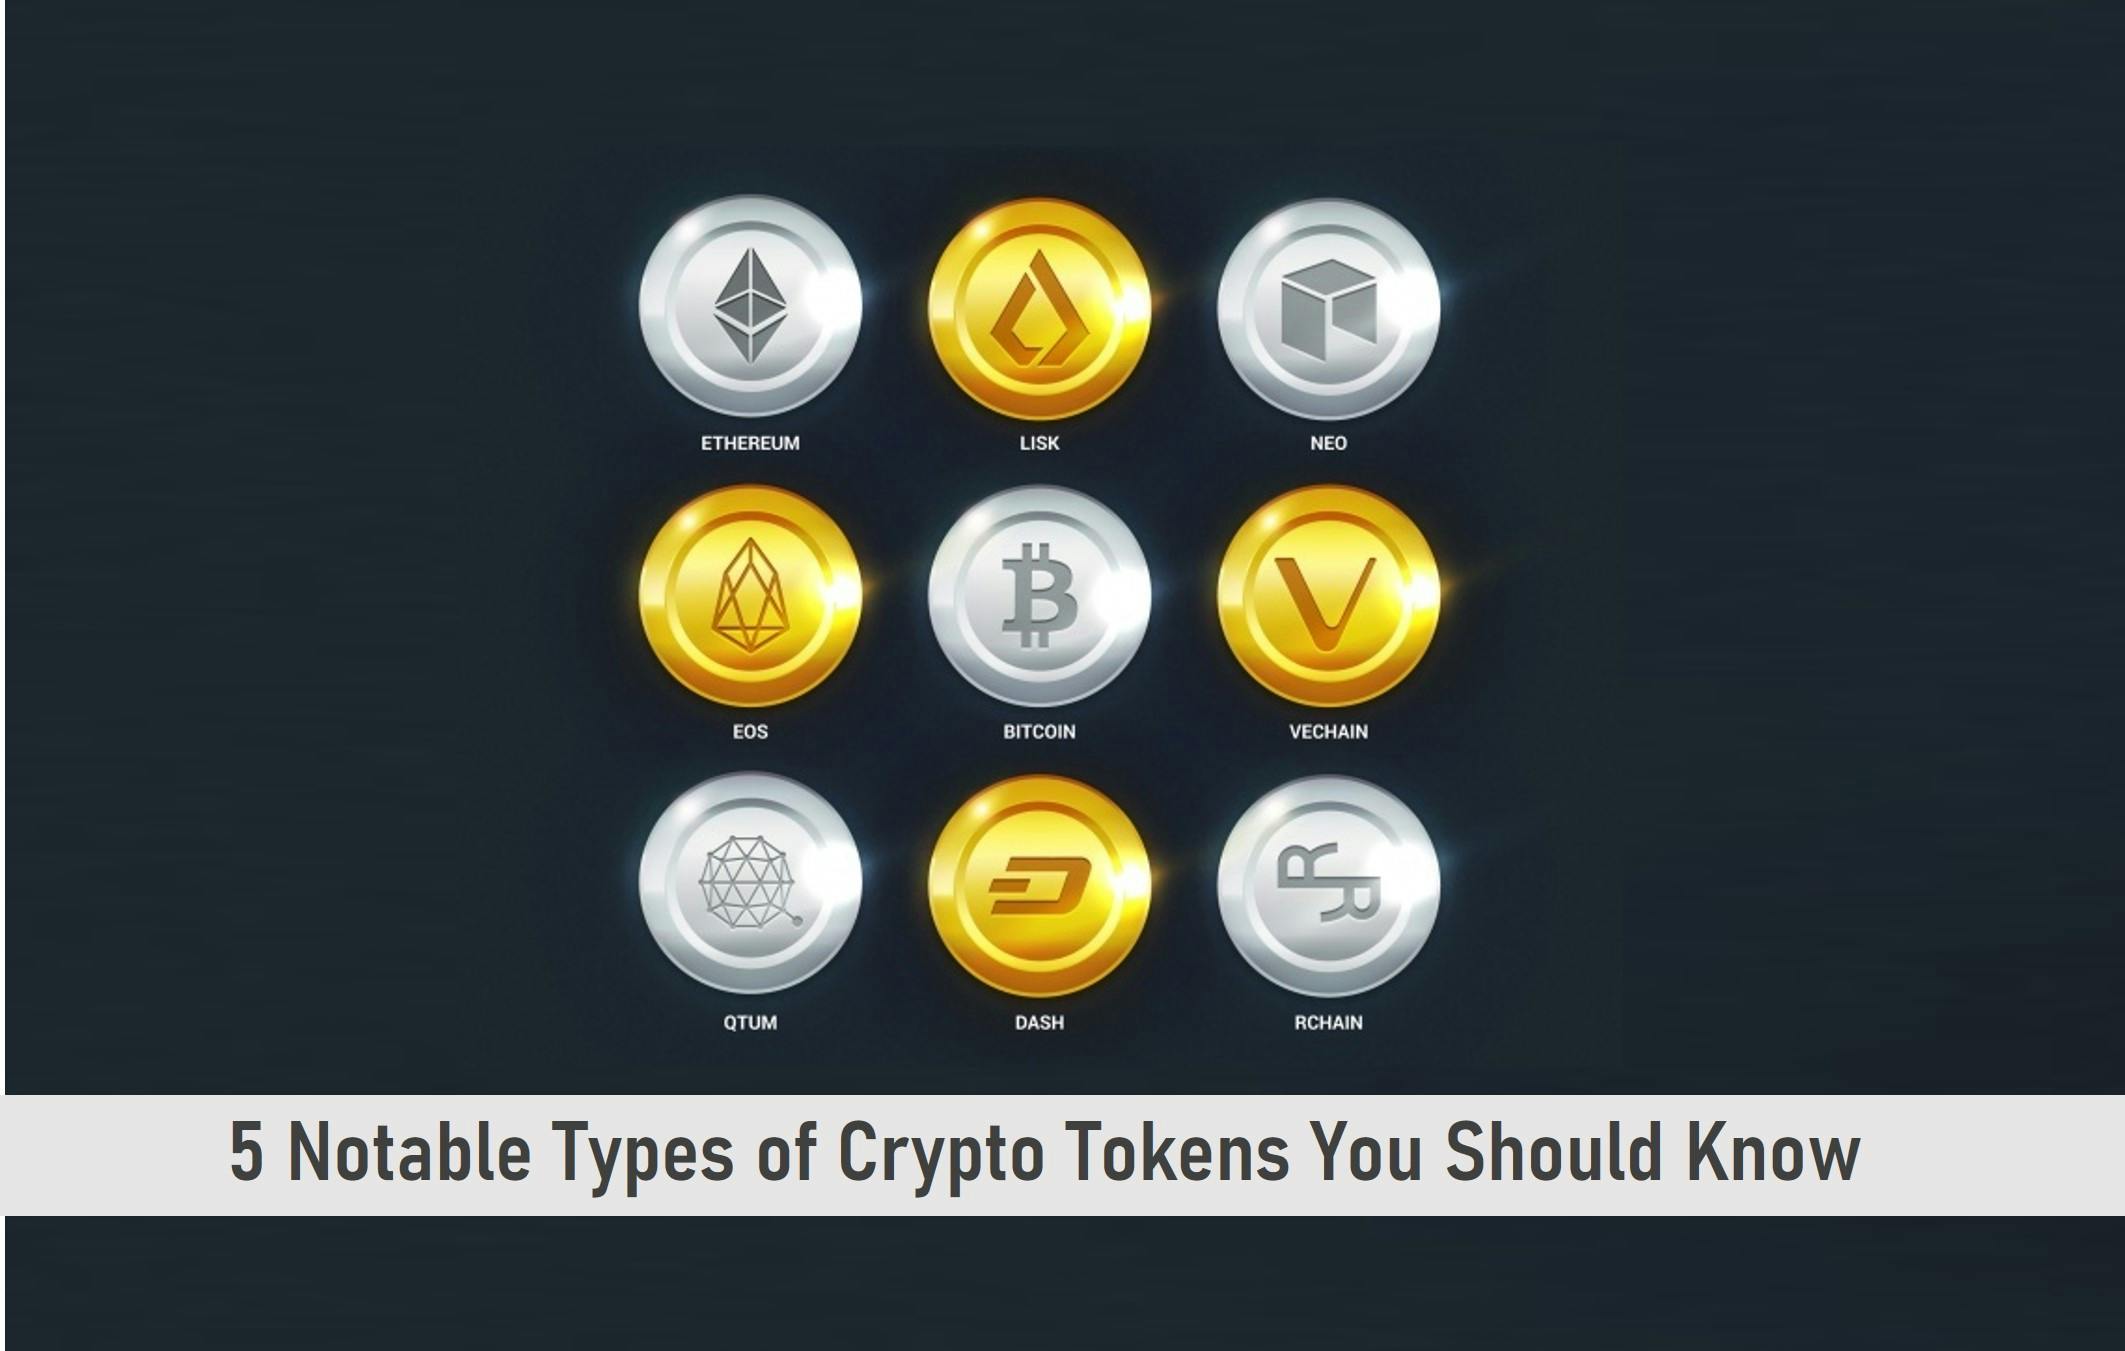 5 Notable Types of Crypto Tokens You Should Know